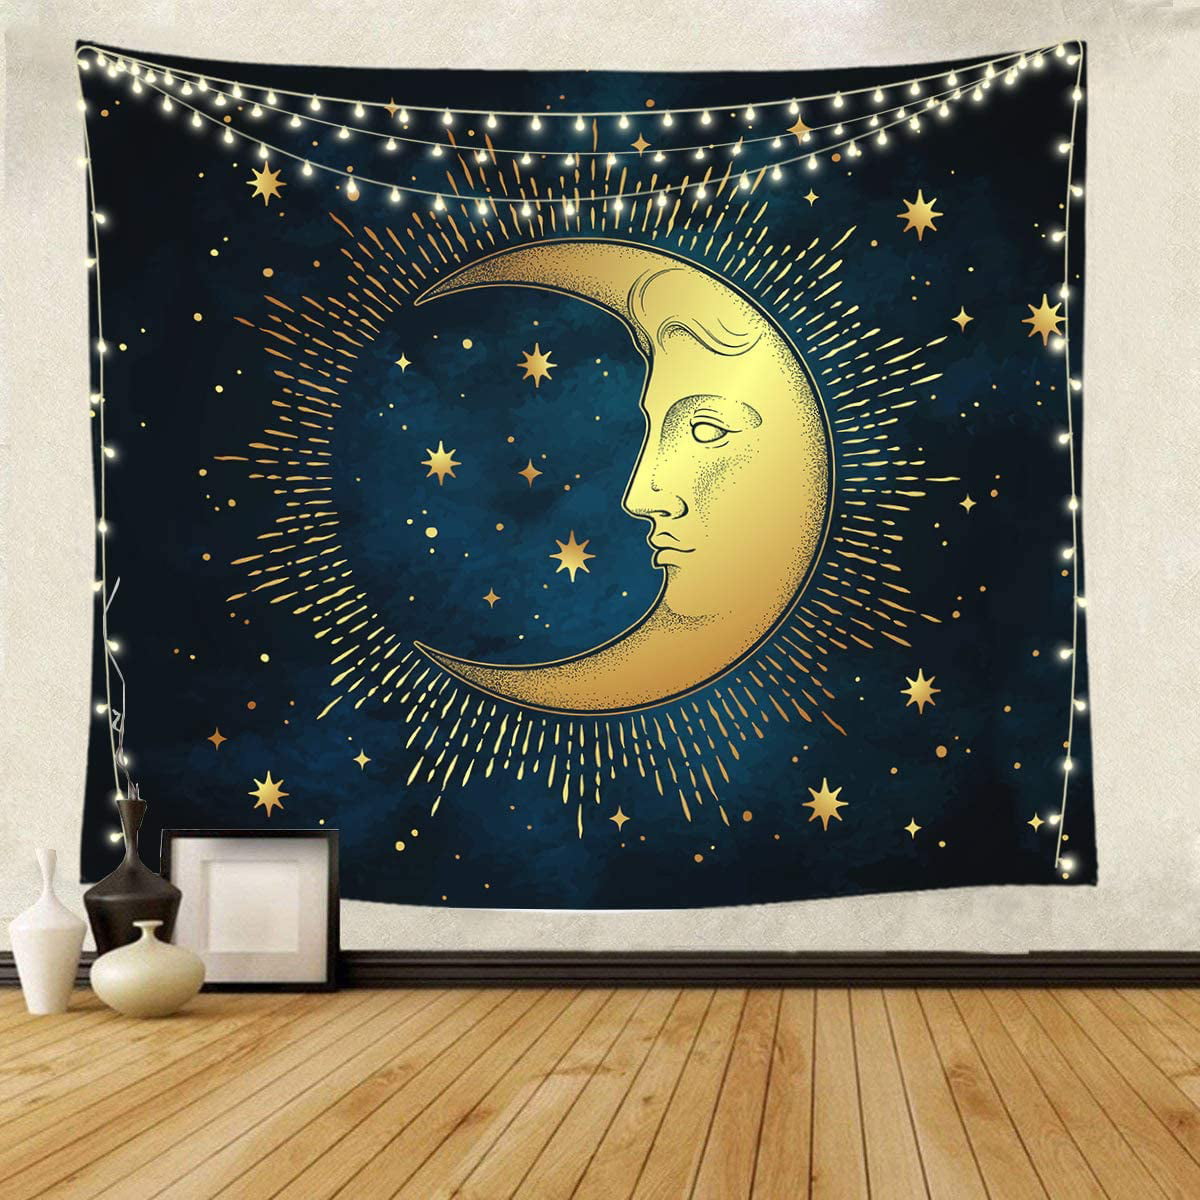 Moon Sun and Stars Blue Woven Blanket Wall Tapestry Throw with Fringe ZodiacMoon 